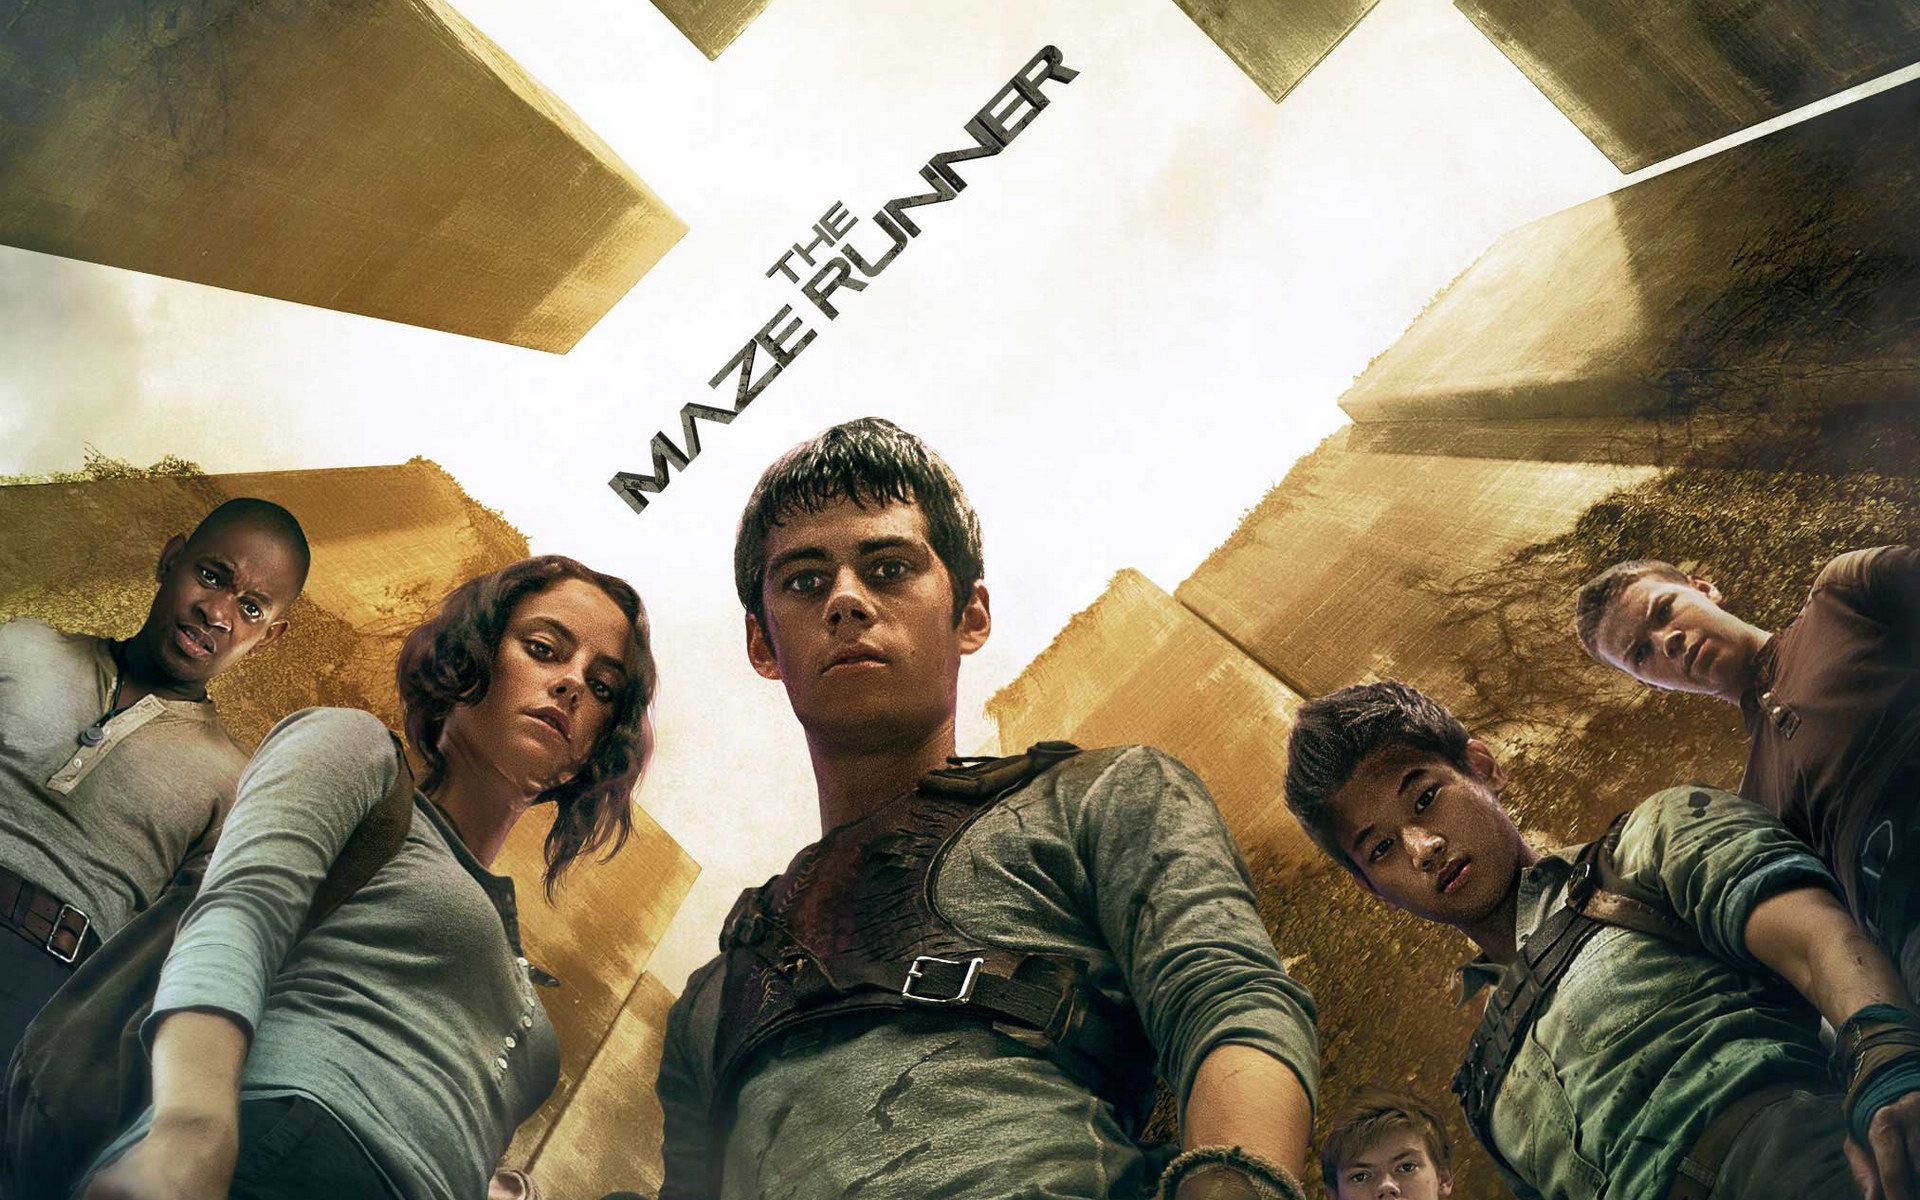 The Maze Runner HD movie wallpapers #4 - 1920x1200